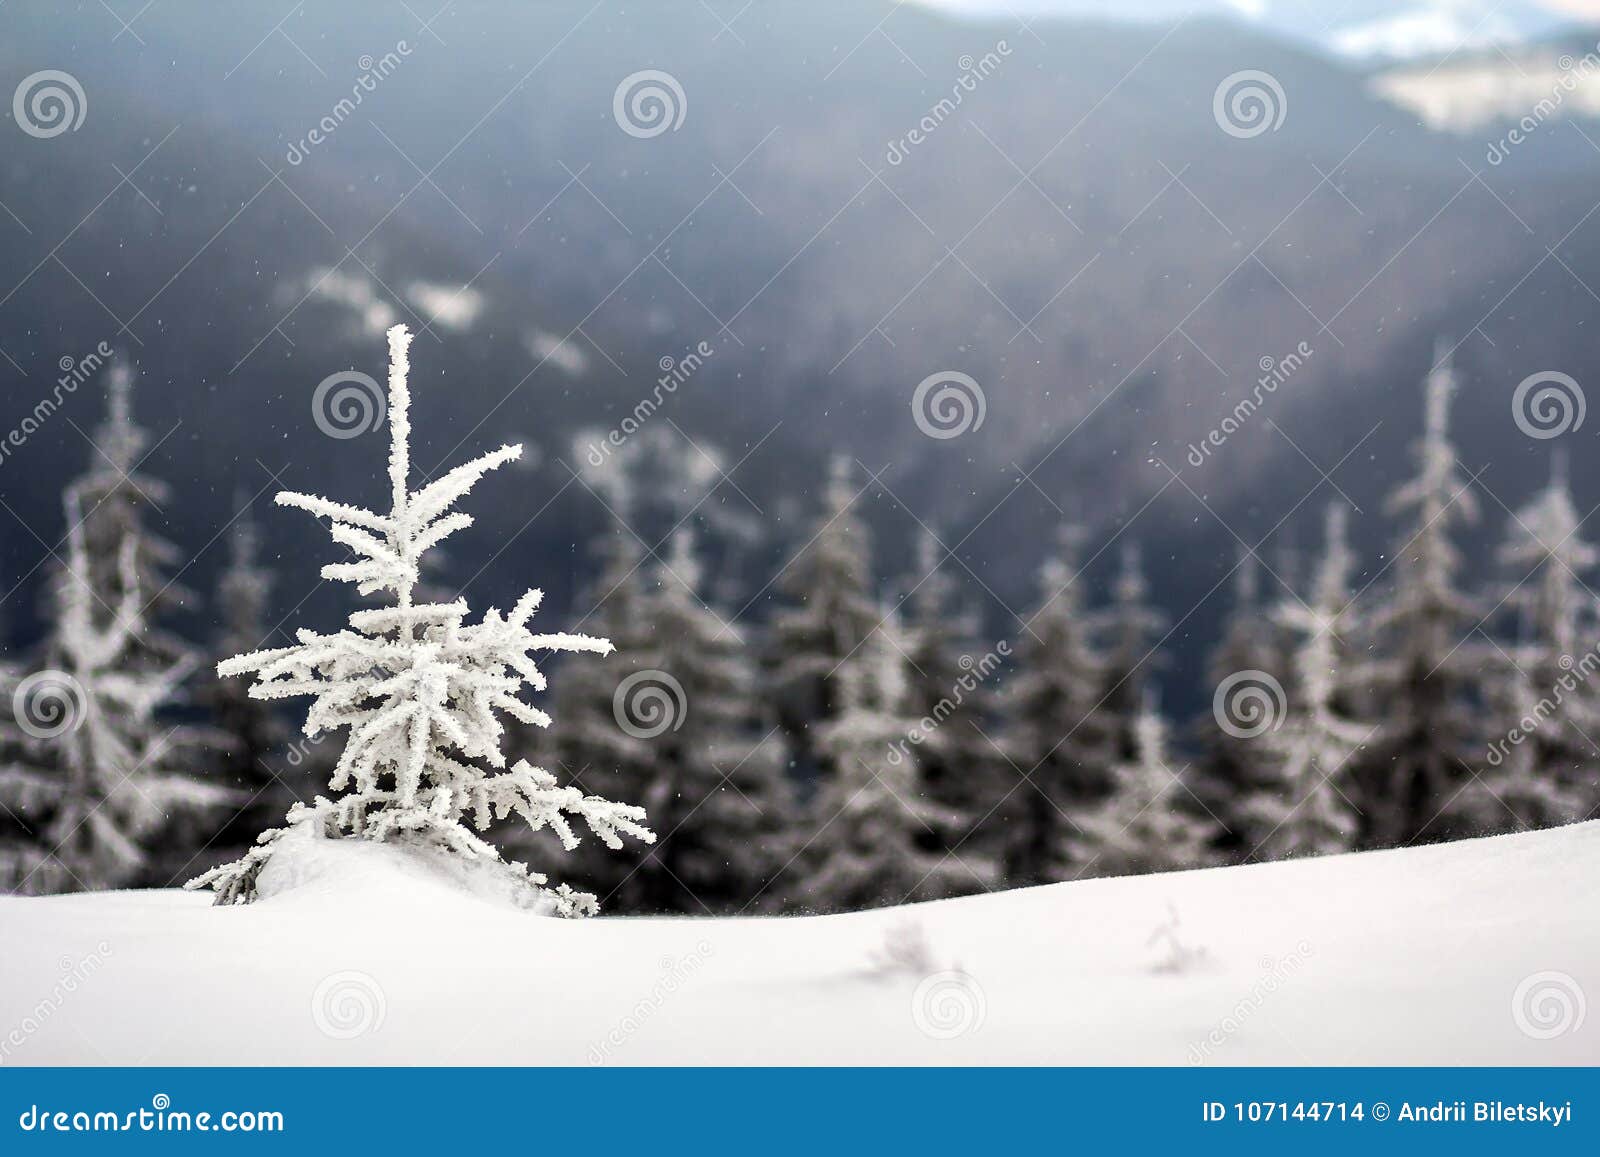 Download Winter Landscape With Snow Covered Small Pine Tree Stock Image of pine